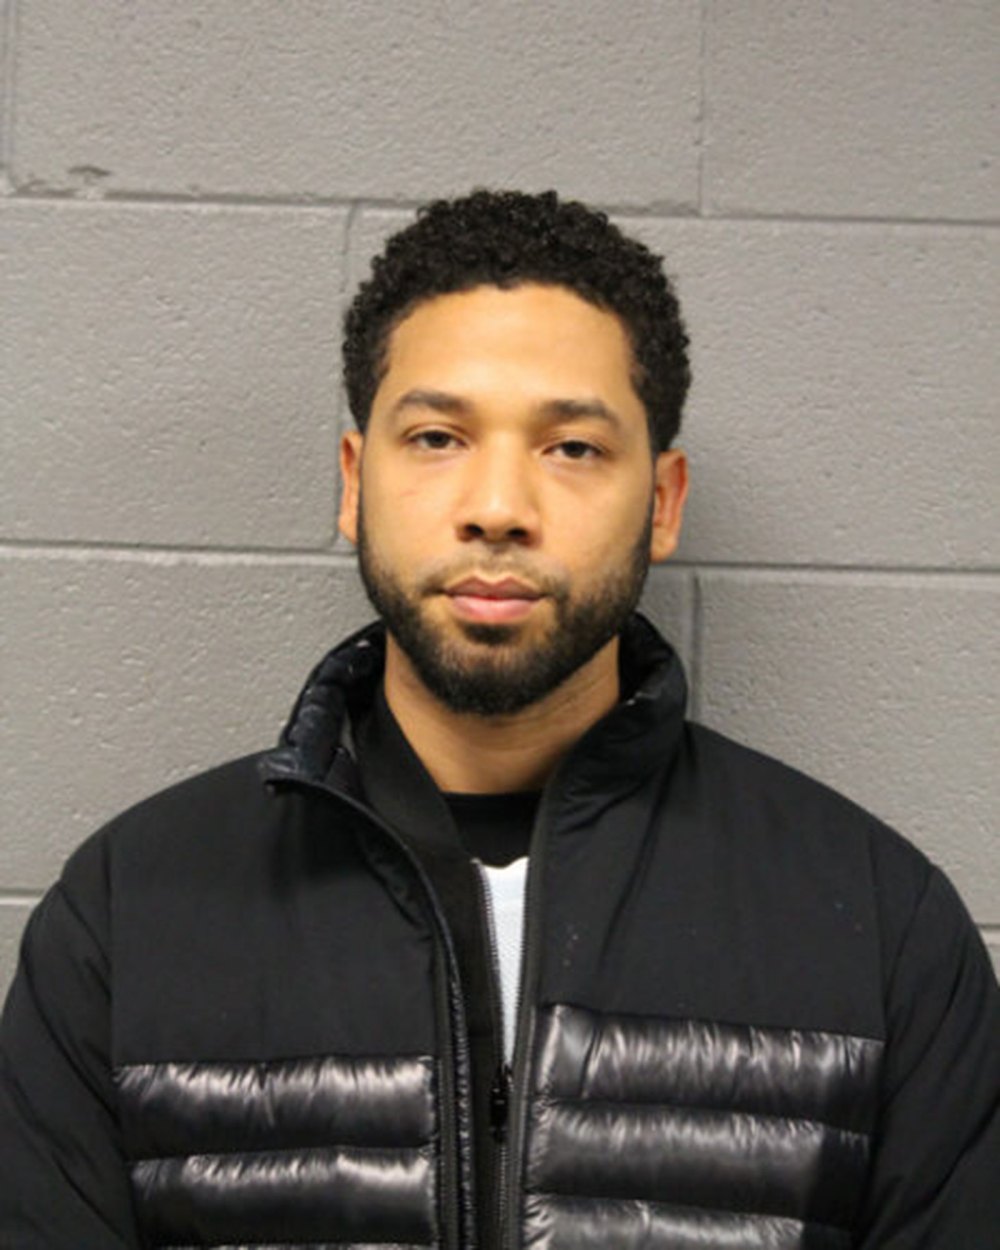 mugshot ‘Empire’ Star Jussie Smollett Arrested for Filing a False Police Report After Attack Claim